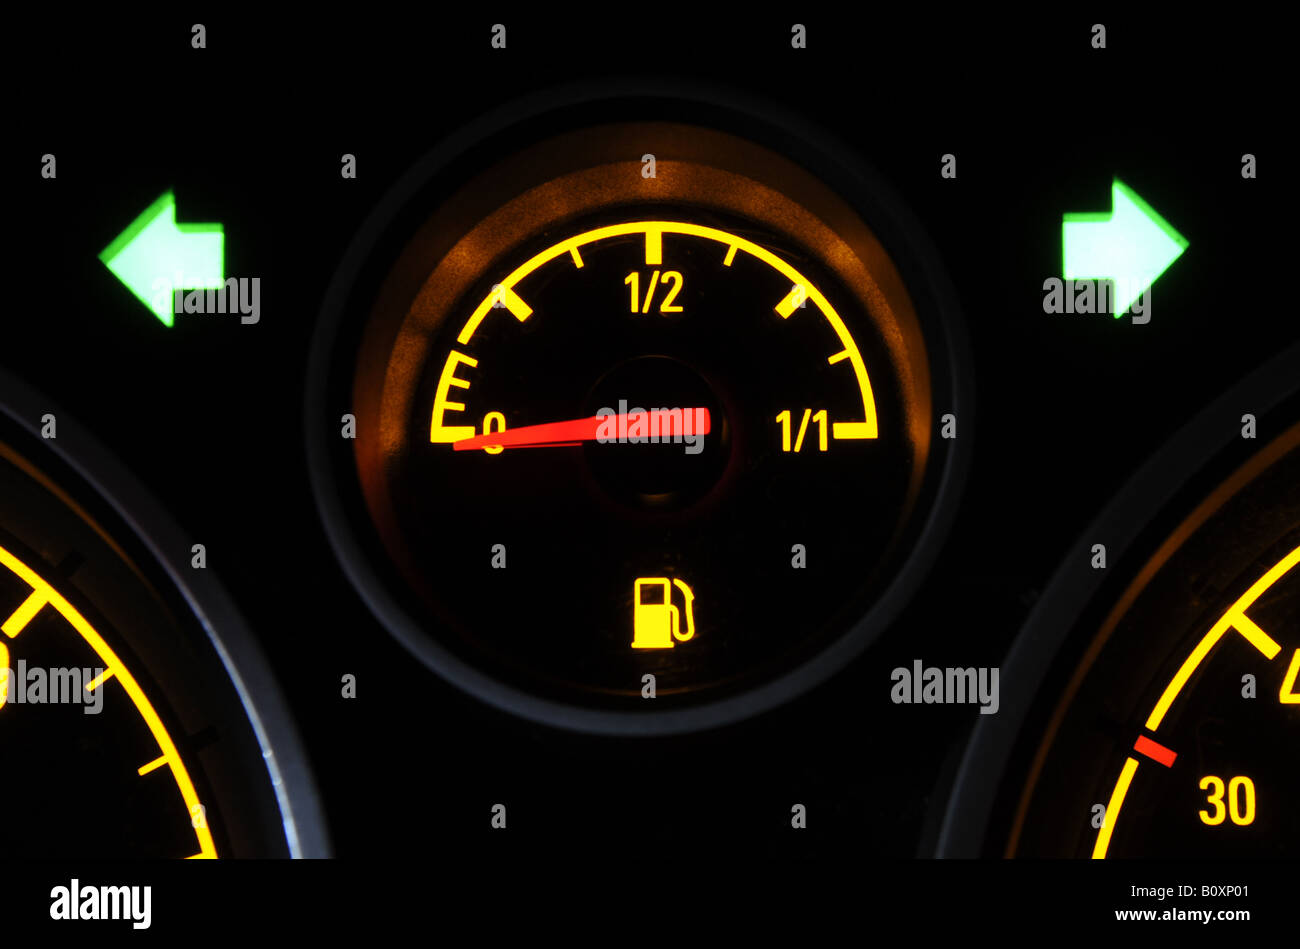 A BRITISH CAR FUEL GAUGE SHOWING LOW FUEL WITH FUEL WARNING LIGHT AND HAZARD FLASHERS,UK. Stock Photo